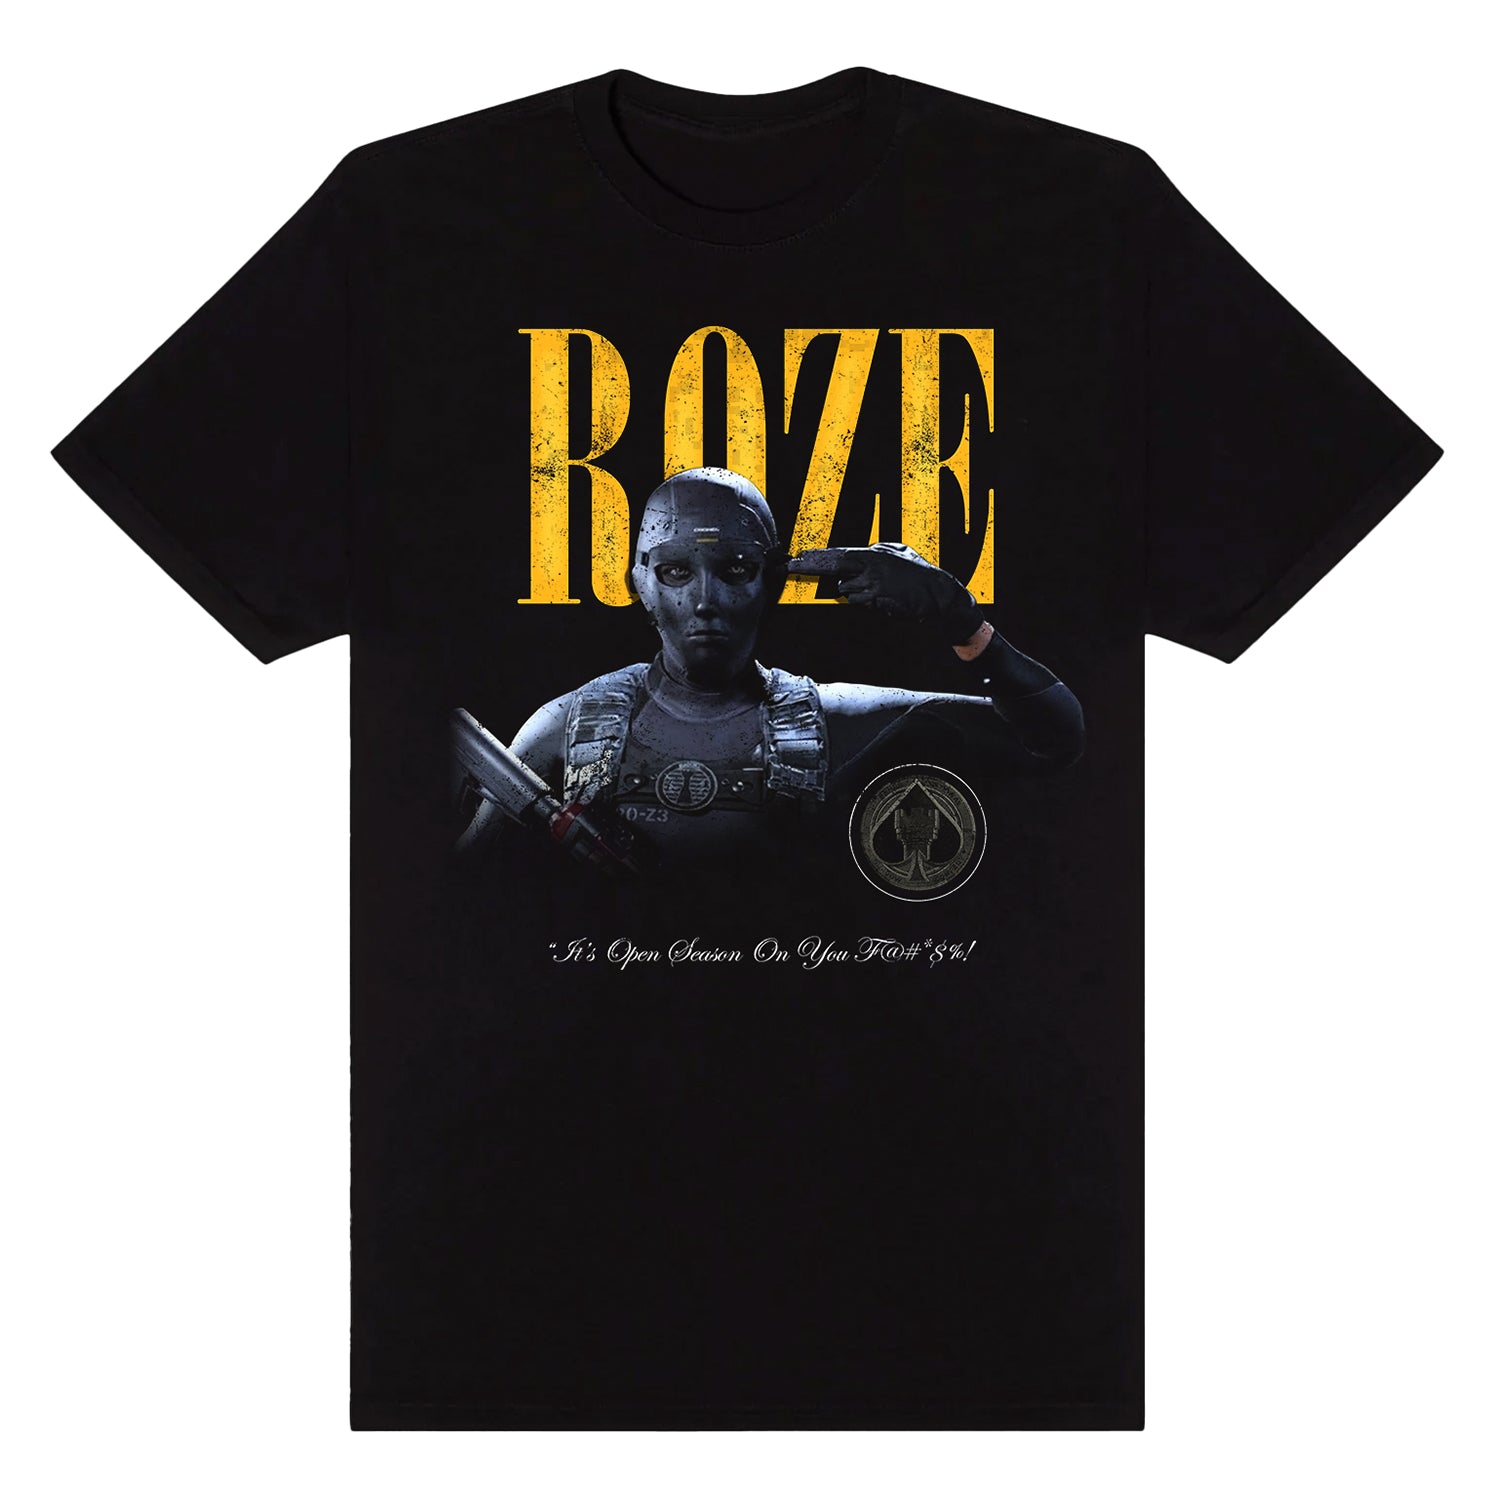 Call of Duty Young & Reckless Black Roze T-Shirt - Front View with Roze Design and Logo